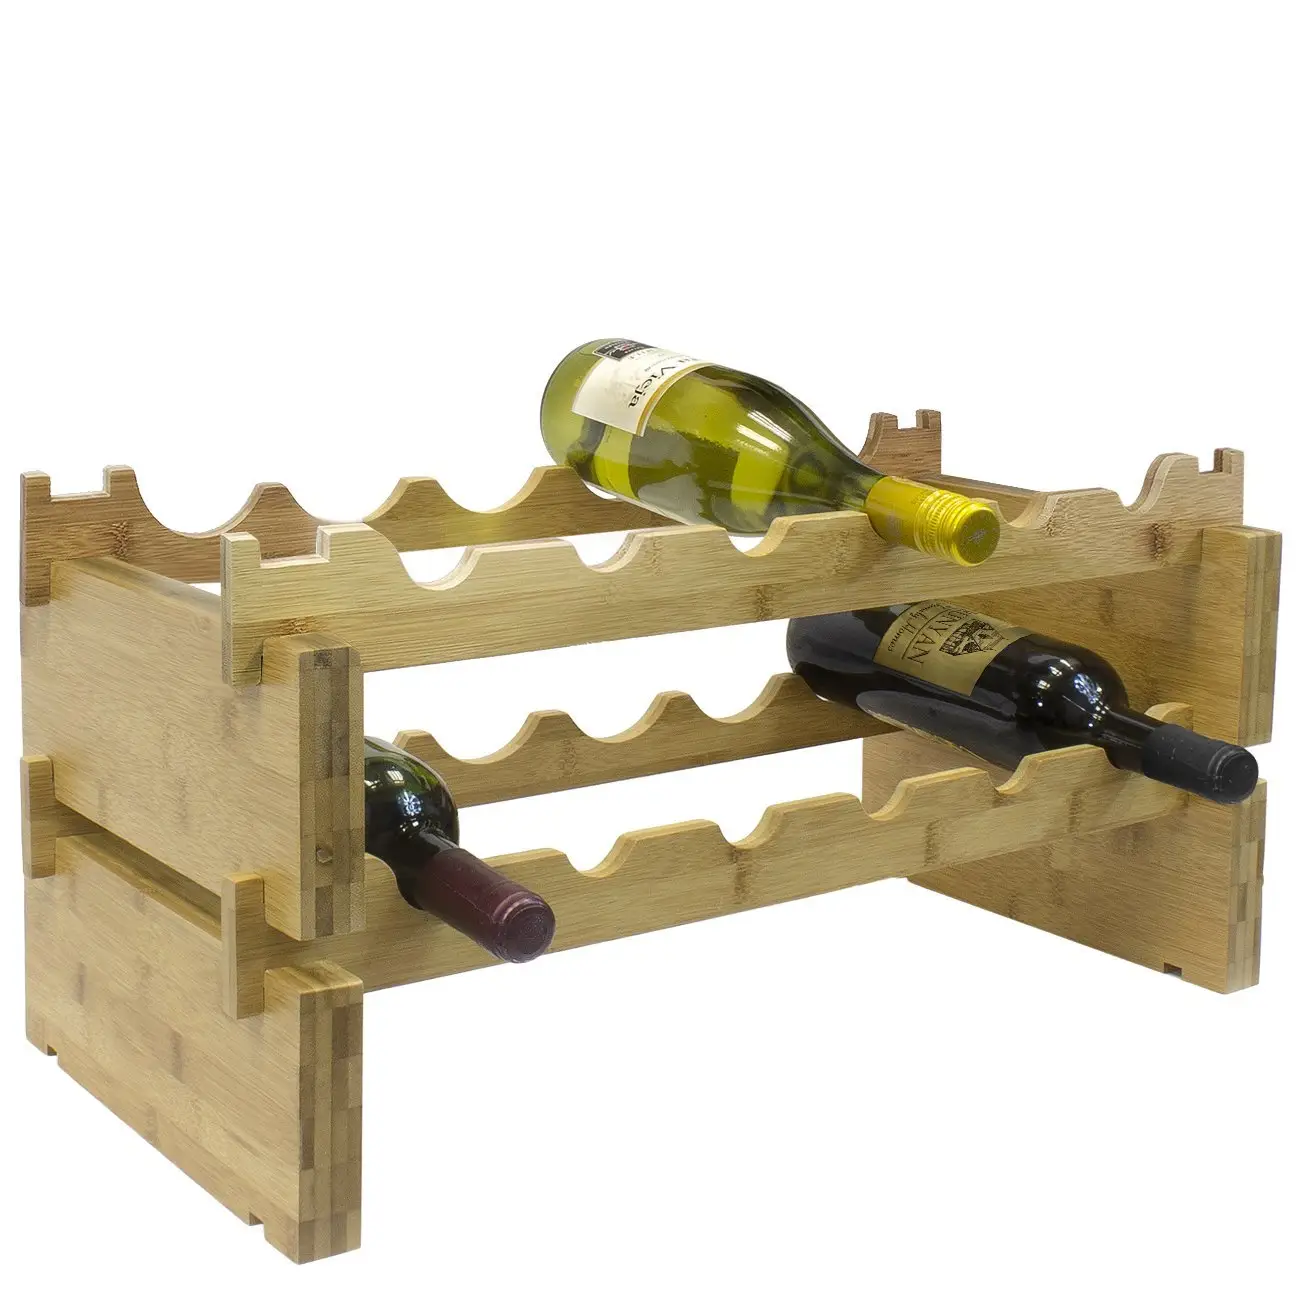 Bamboo Stackable Modular Wine Rack Large Capacity Stackable Storage Stand Display Shelves Wooden Wine Holder Perfect For Home